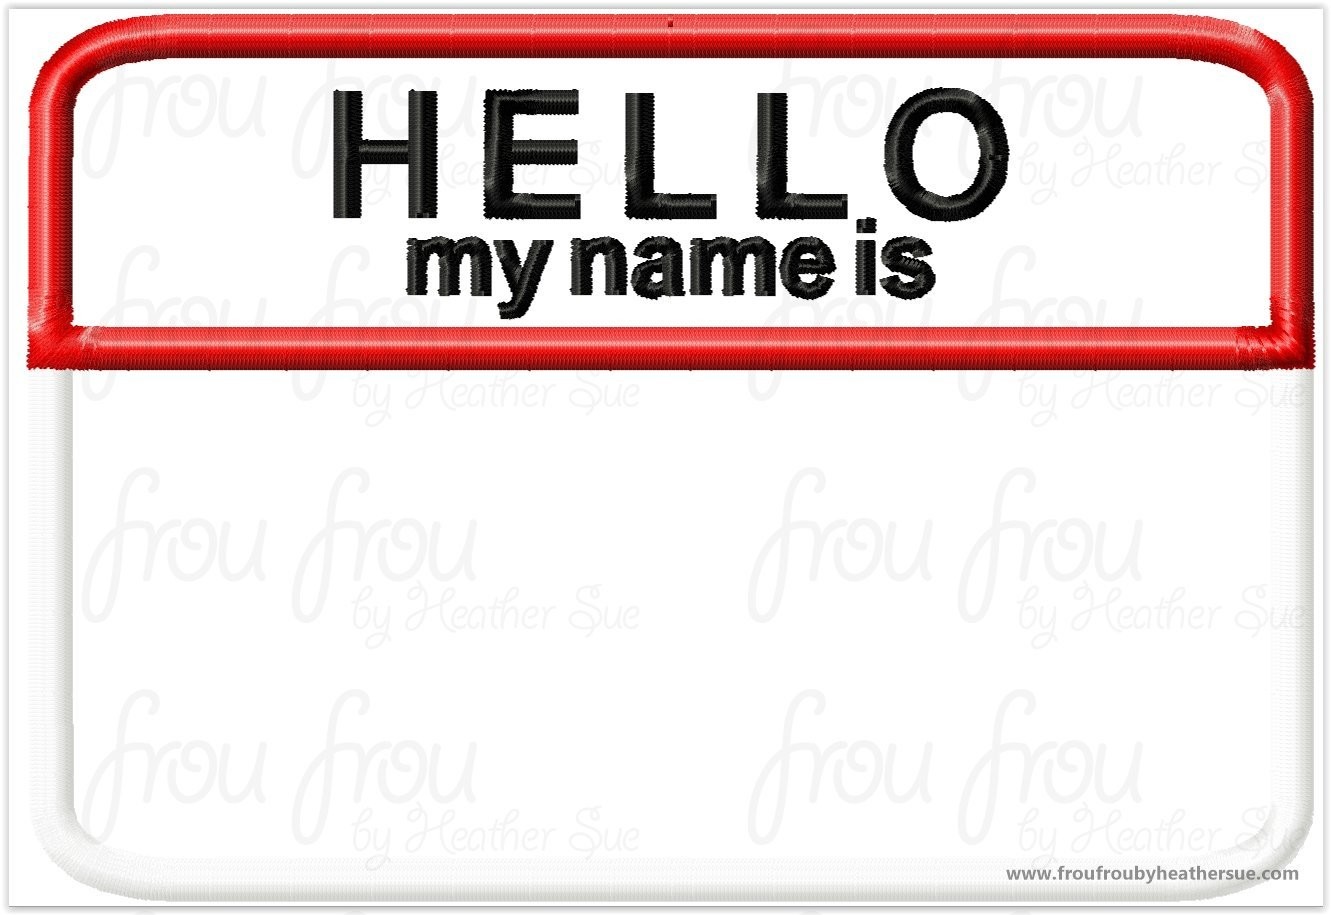 Hello My Name is Blank Nametag Applique Embroidery Design, multiple sizes, including 2